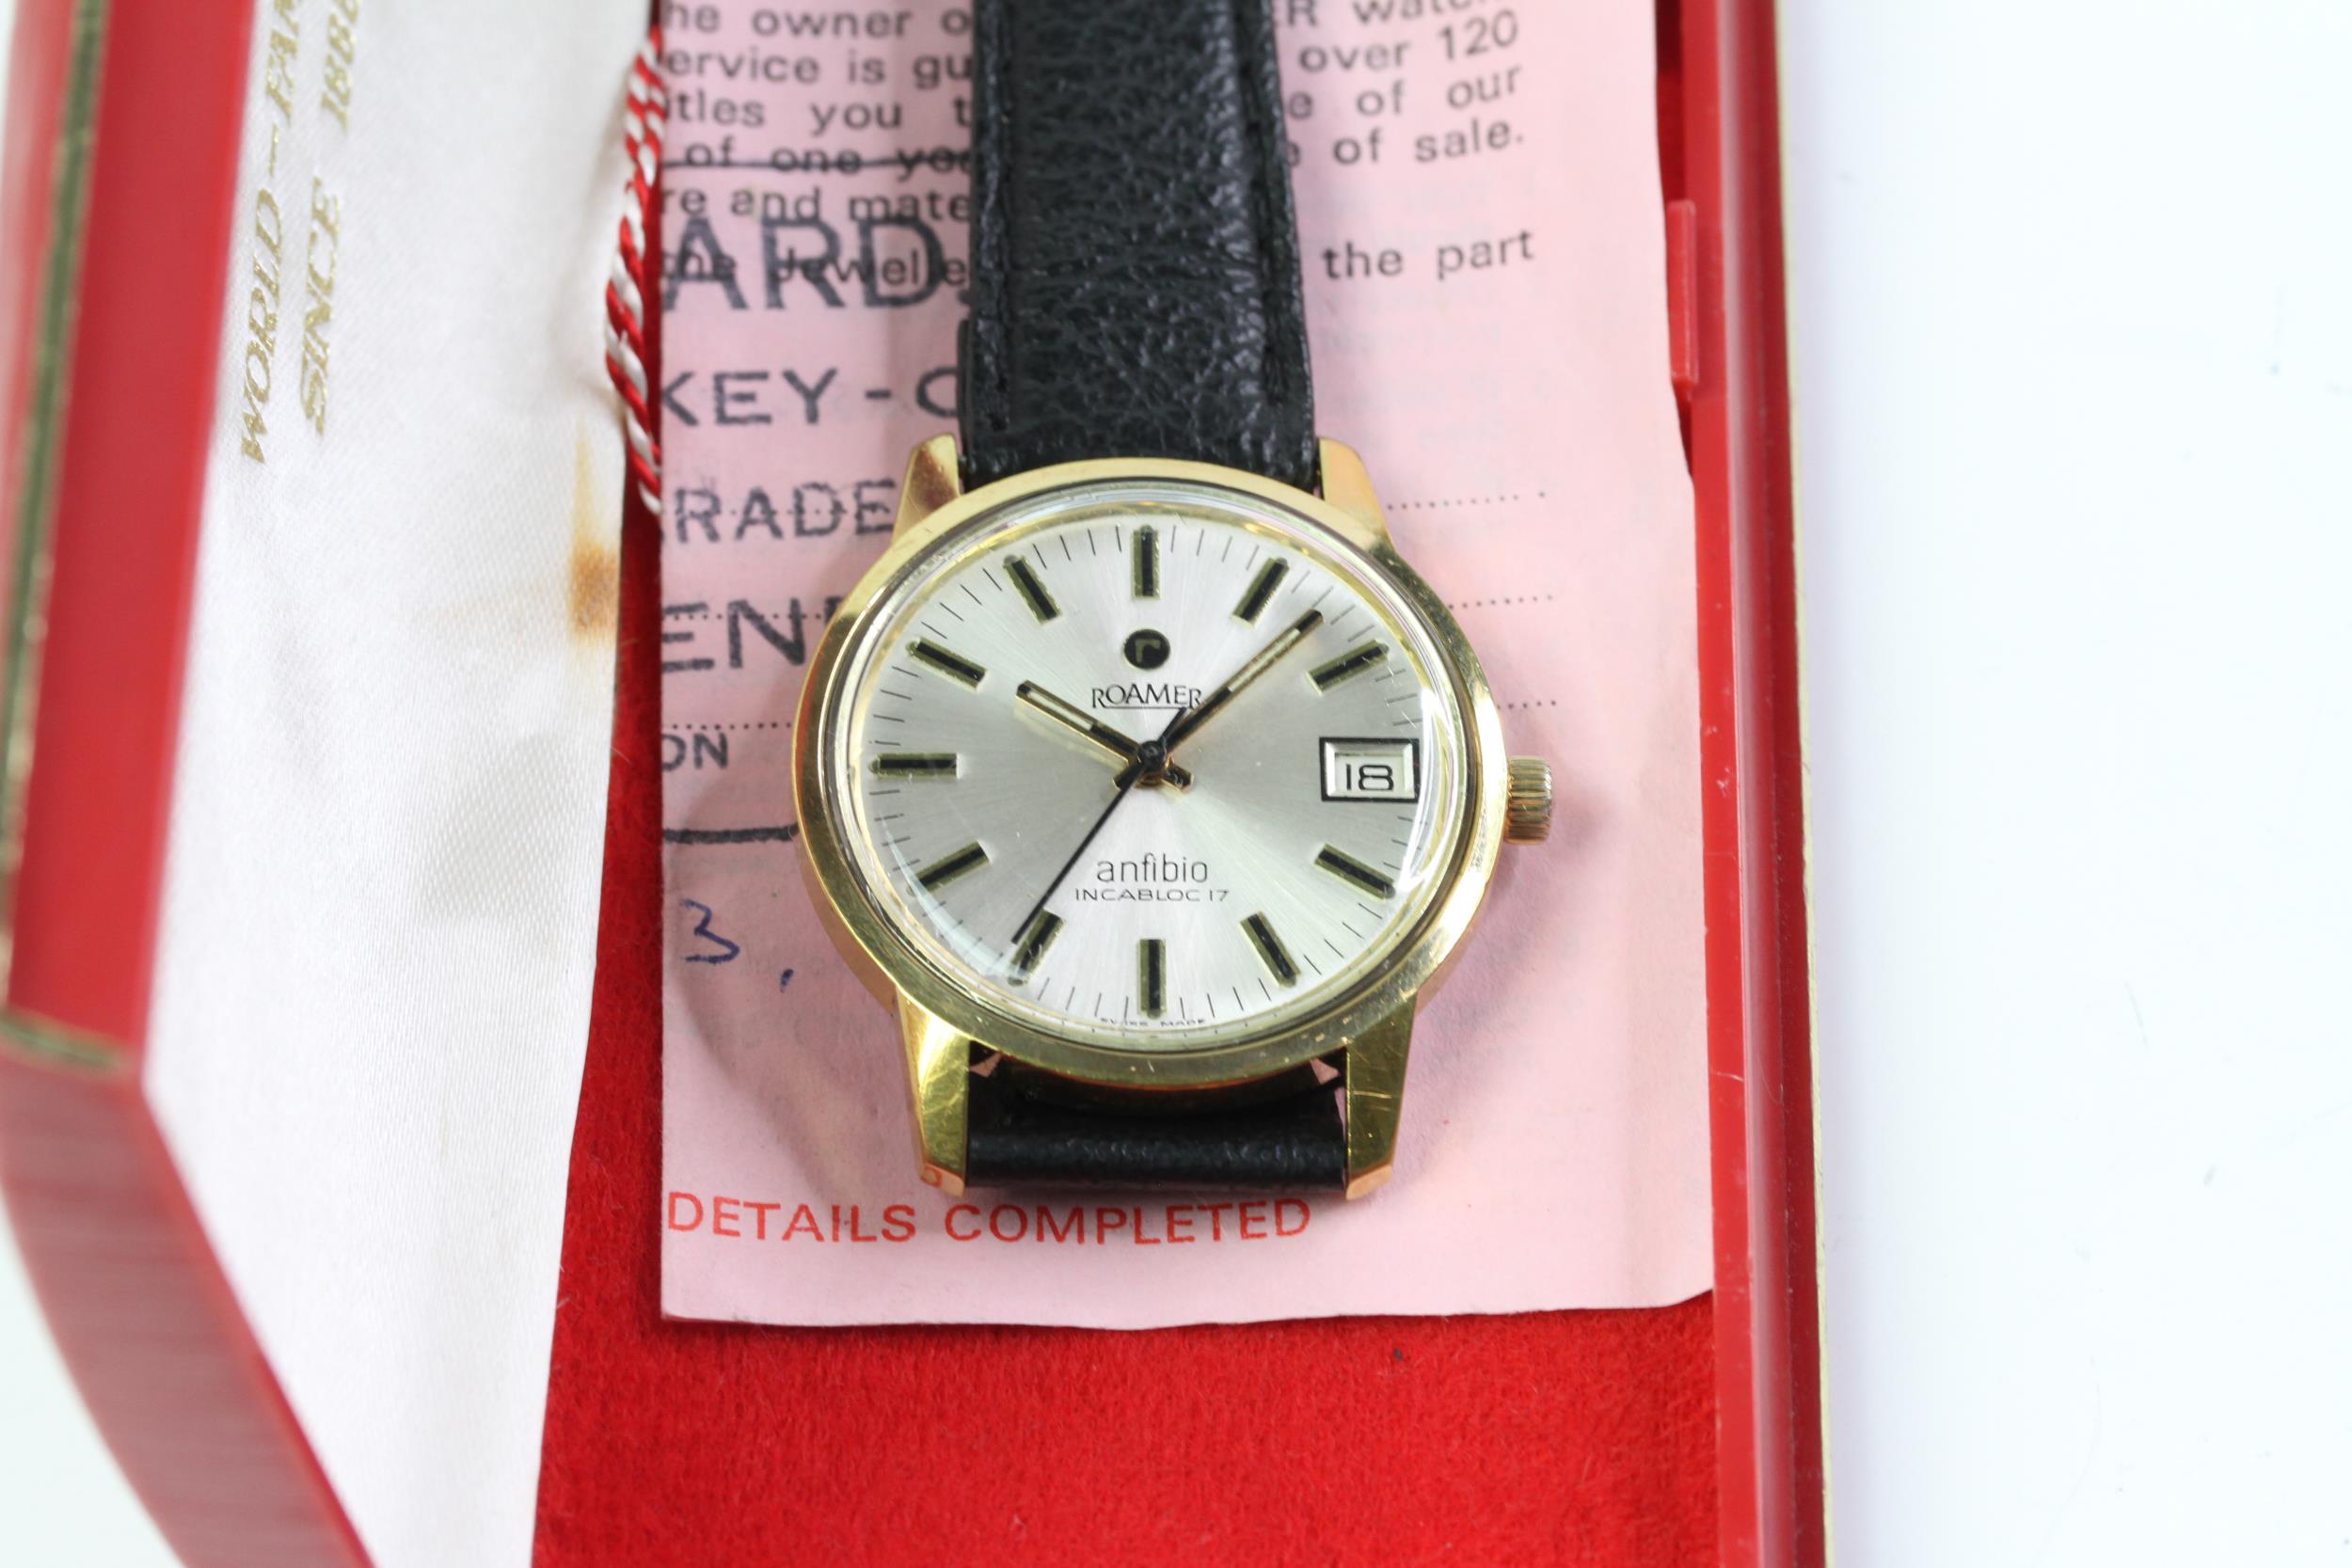 1970s Roamer Anfibio Incabloc date watch, boxed with paperwork and tag, Gold plated stainless - Image 2 of 4